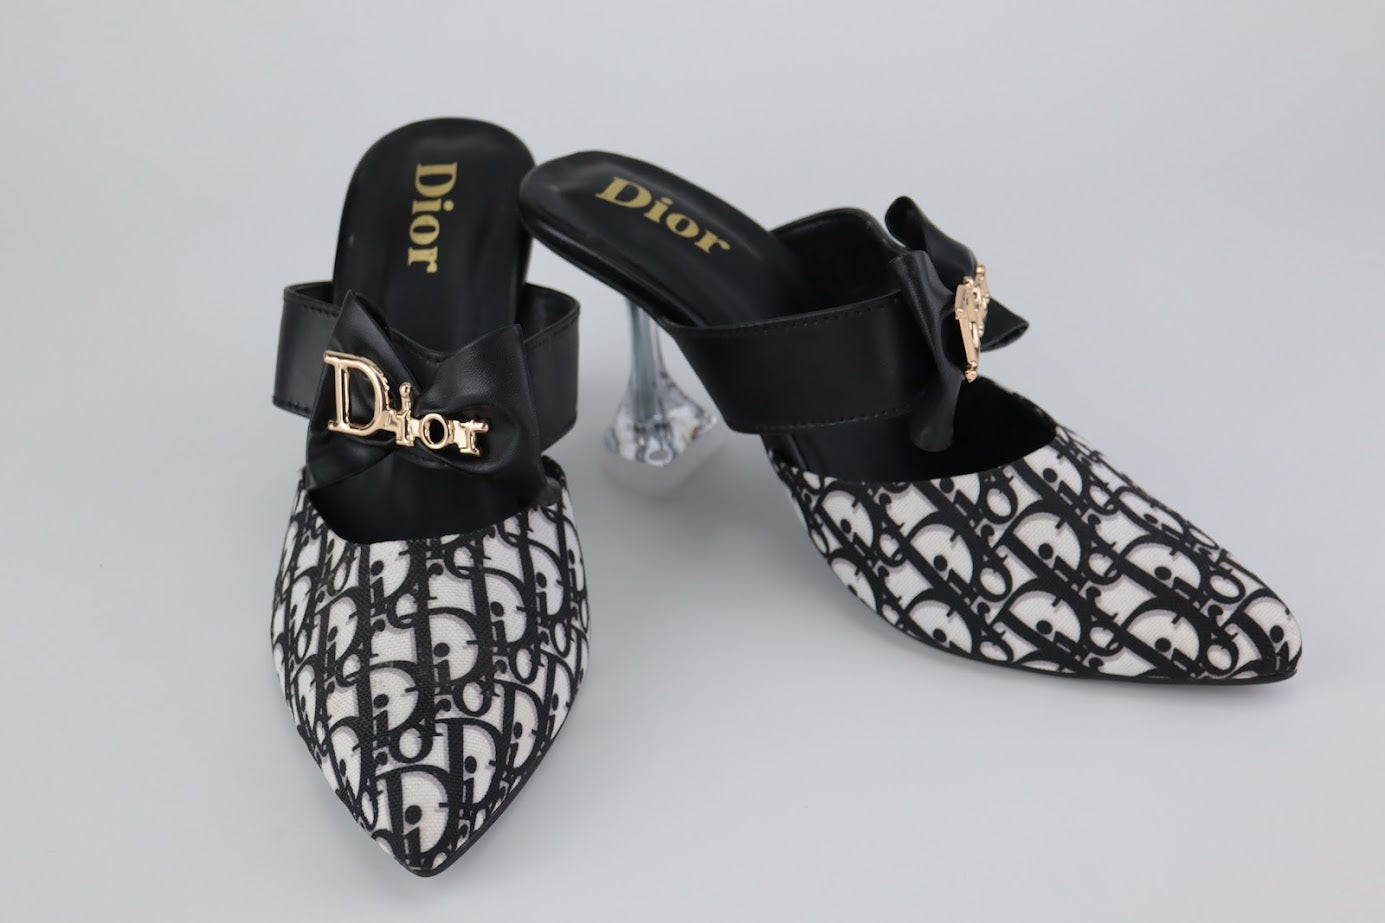 DIOR's Bow Heel Pumps Court Shoes - Exclusive Pricing for Pakistan